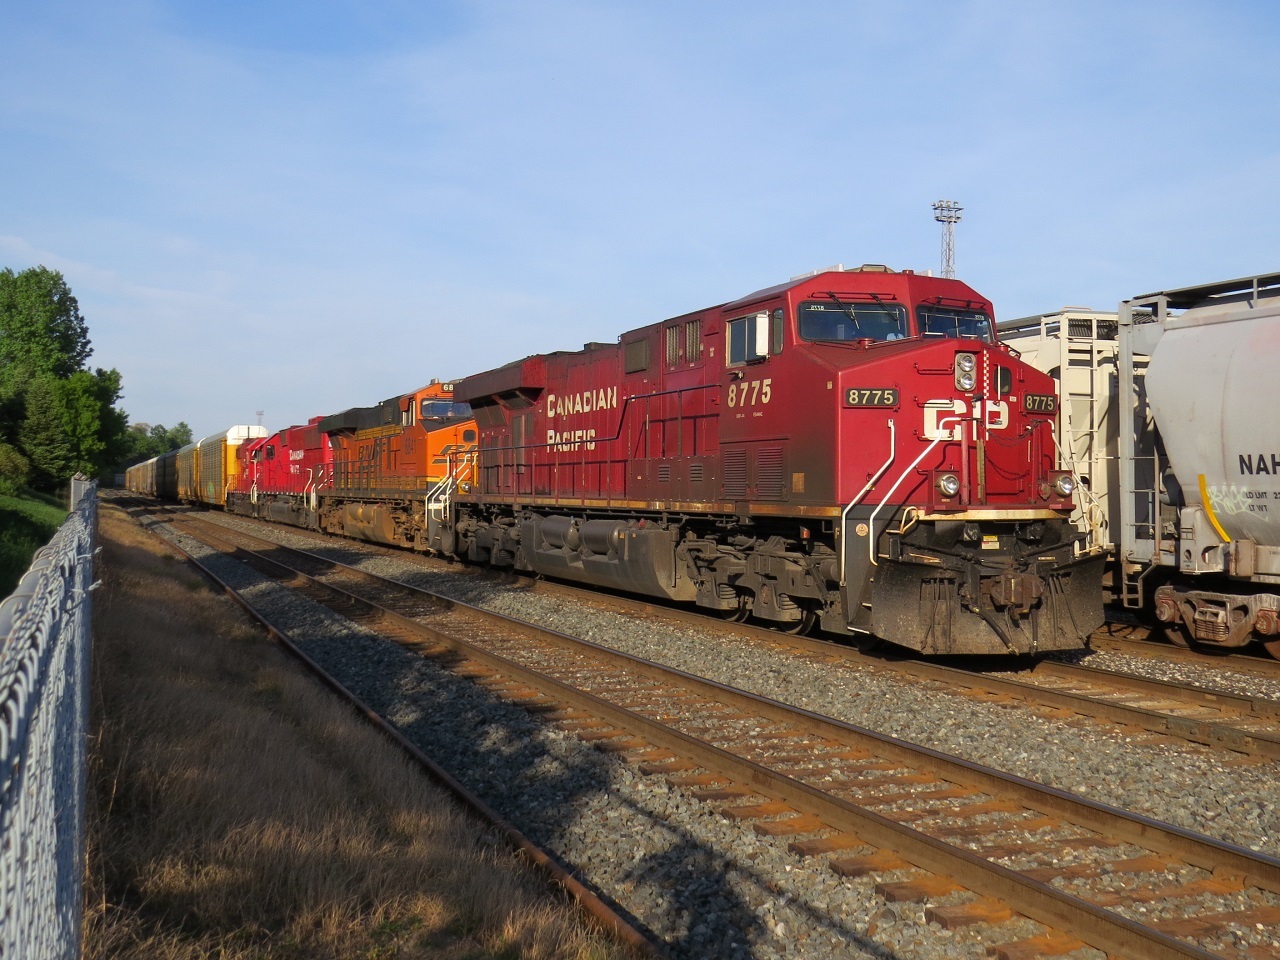 CP 147 prepares to cut off the autoracks and then to set off CP 3103 at the shops.